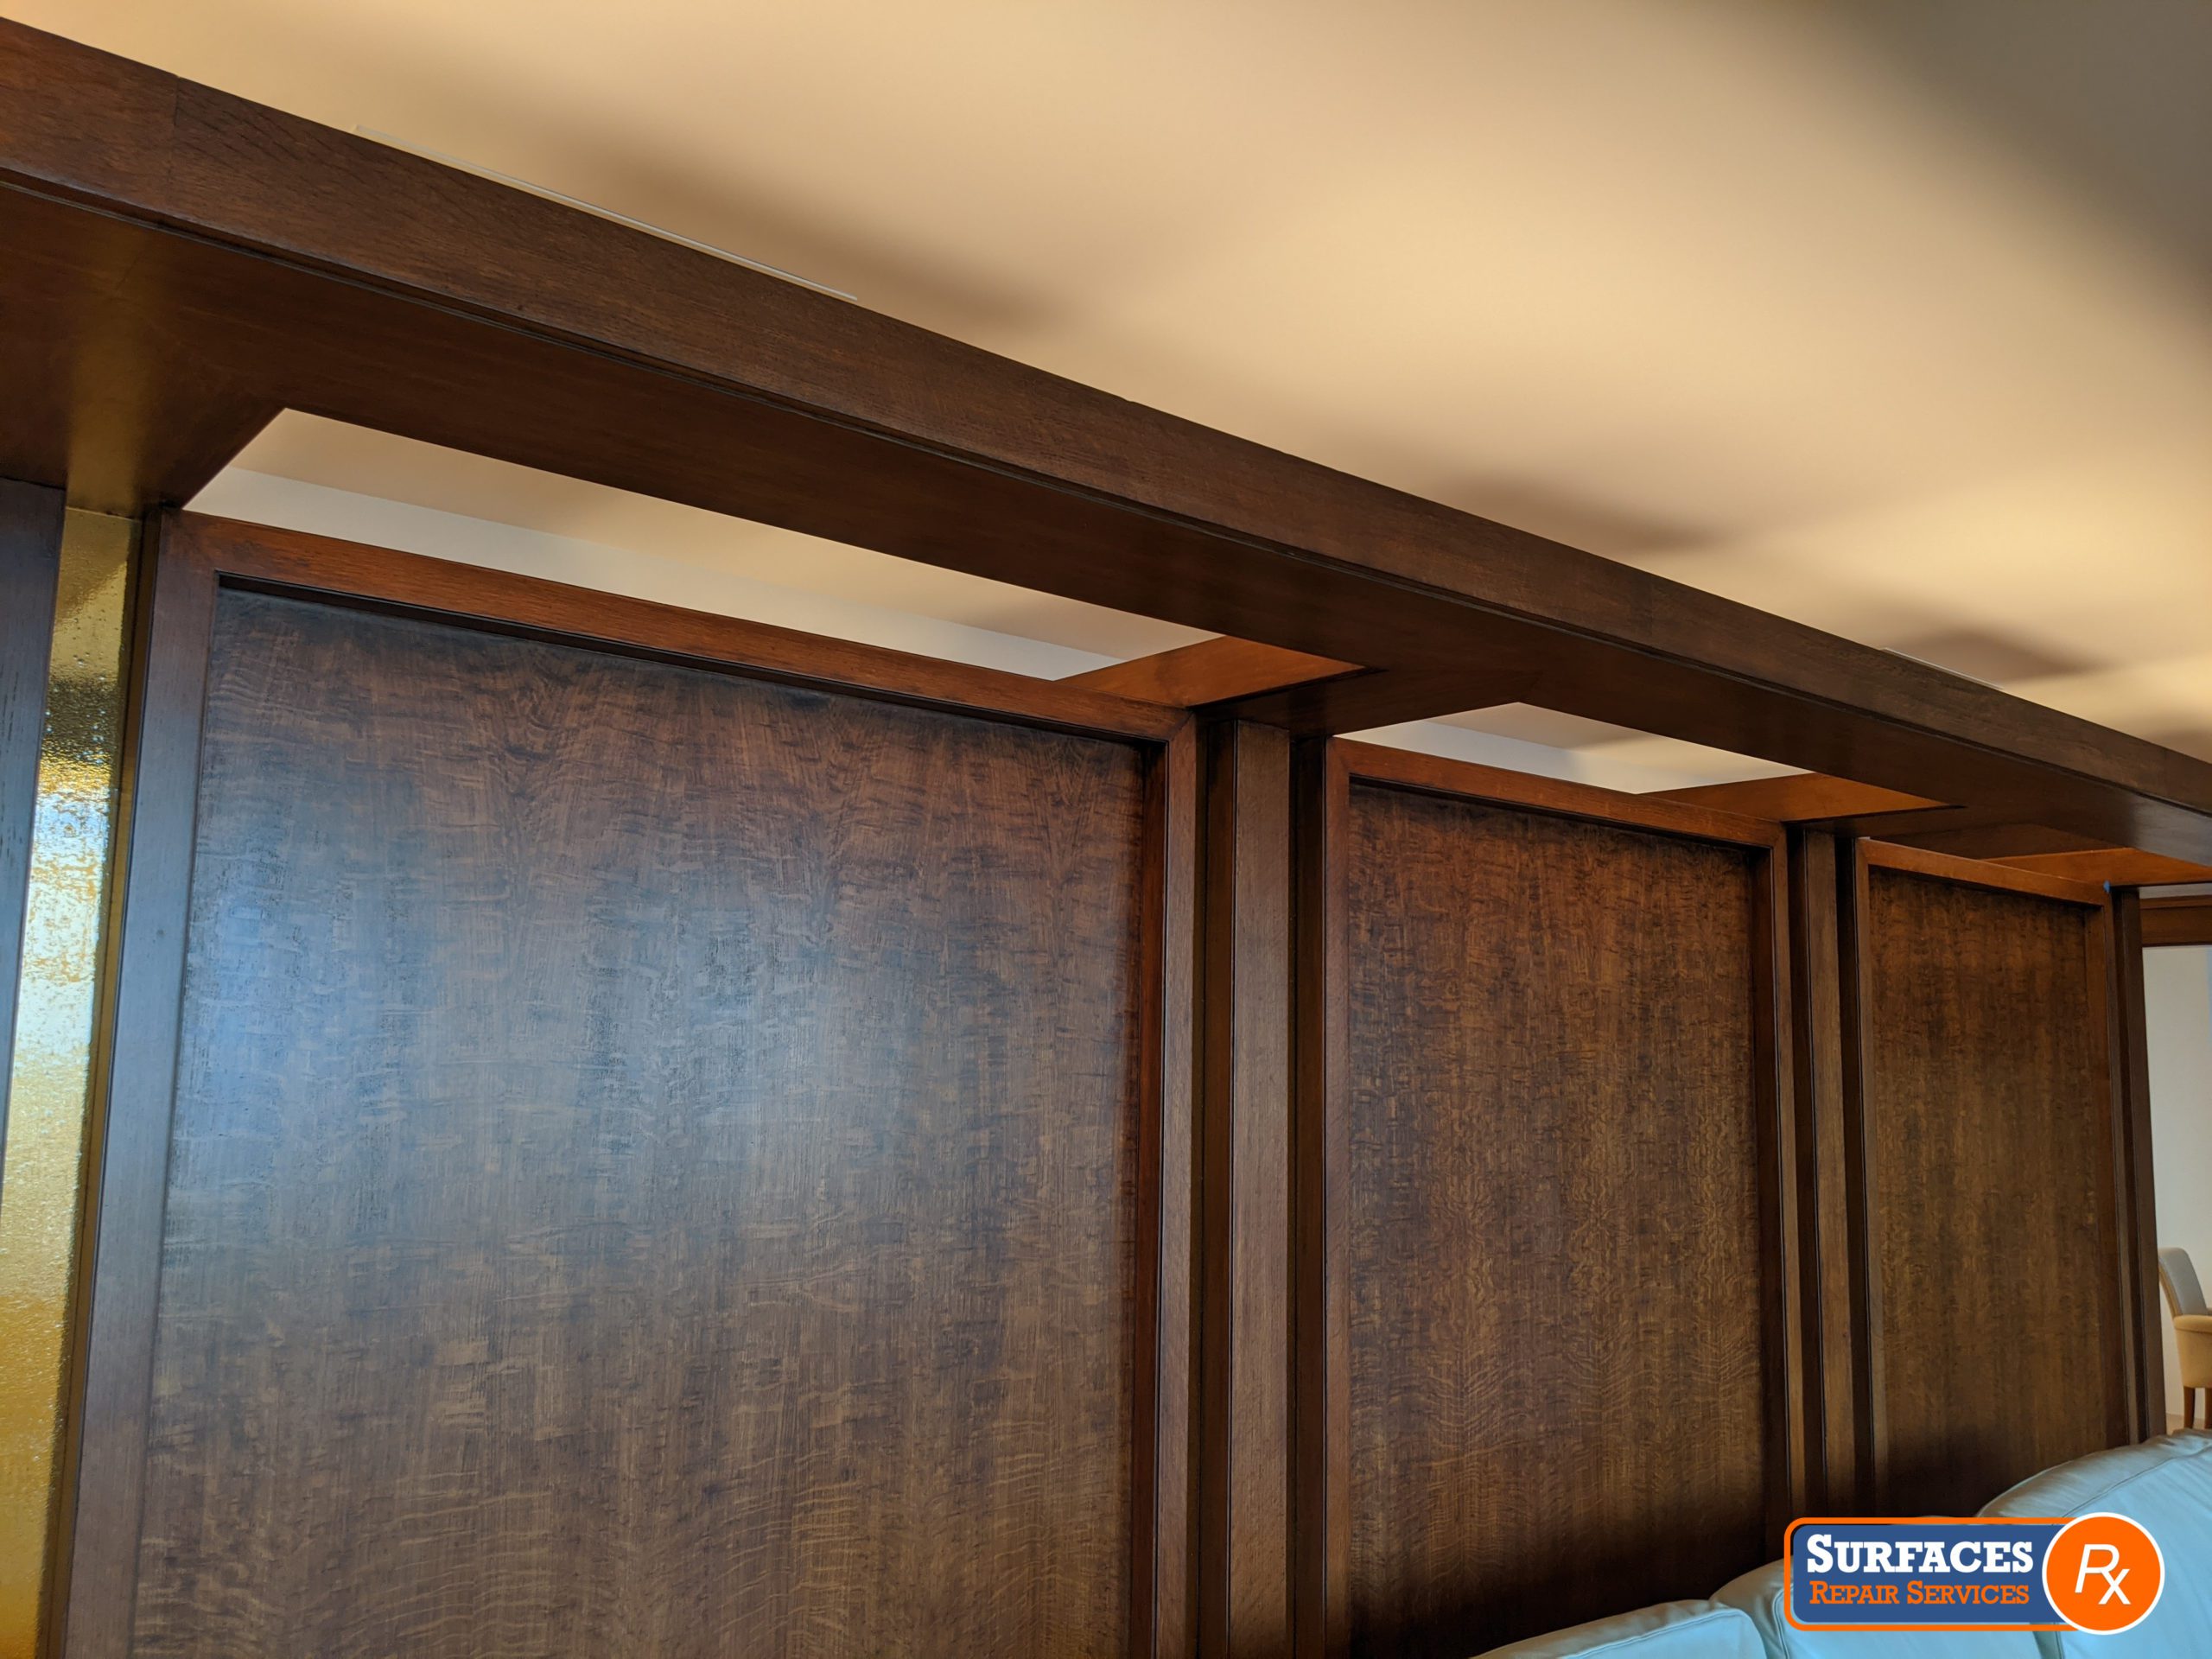 Dallas Millwork Refinishing by Surfaces Rx